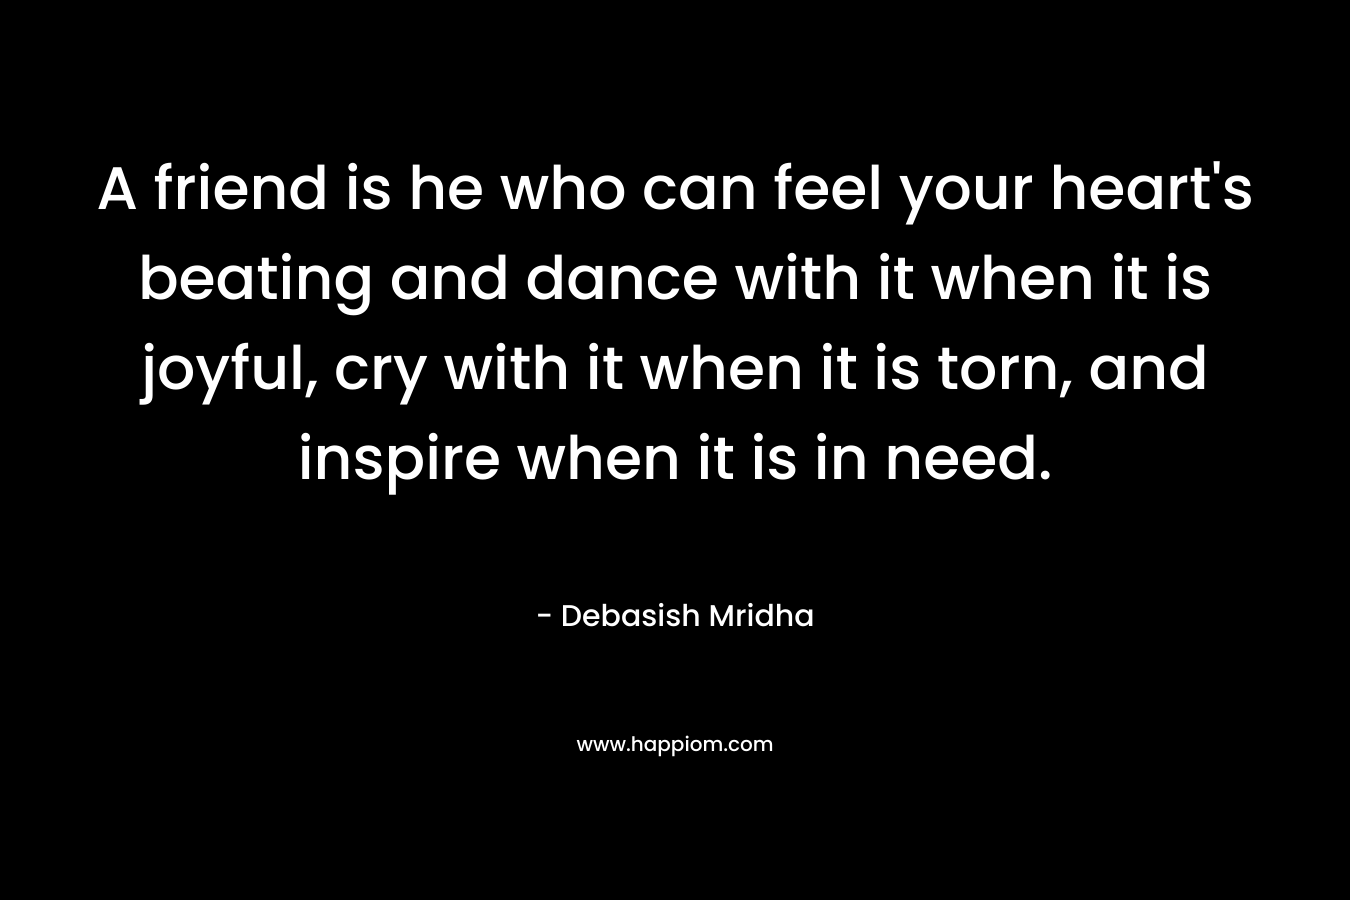 A friend is he who can feel your heart's beating and dance with it when it is joyful, cry with it when it is torn, and inspire when it is in need.